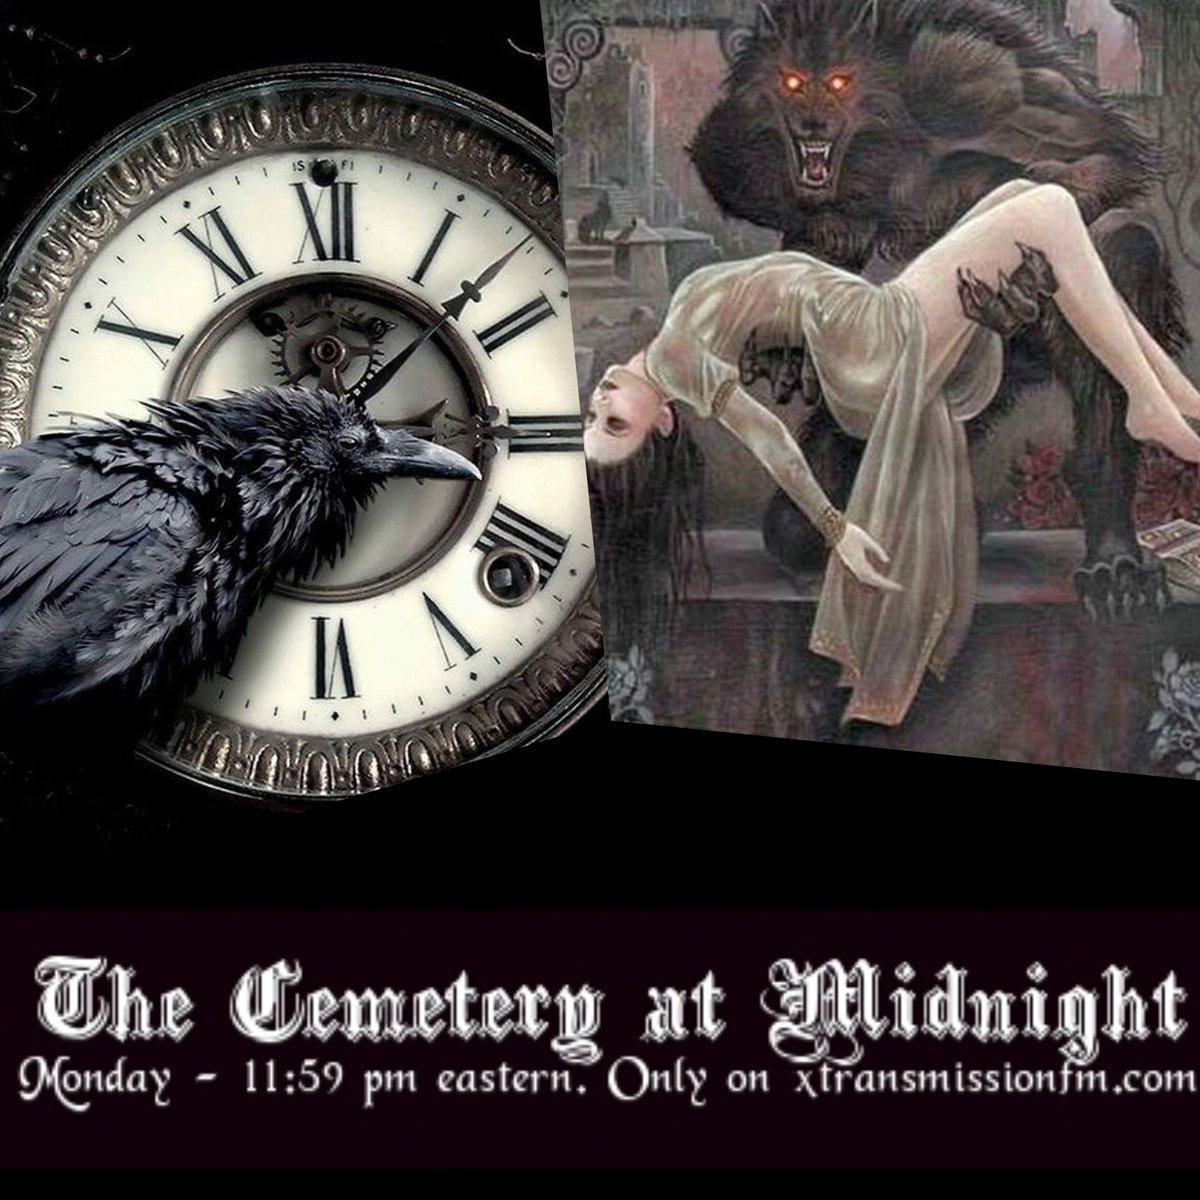 It's a good ole fashioned hodgepodge night in the Cemetery, with plenty of new and classic #goth #rock #metal #darkroots and whatever else we can find. Join us at 11:59 pm eastern on xtransmissionfm.com. Bring snacks, I got the beer.